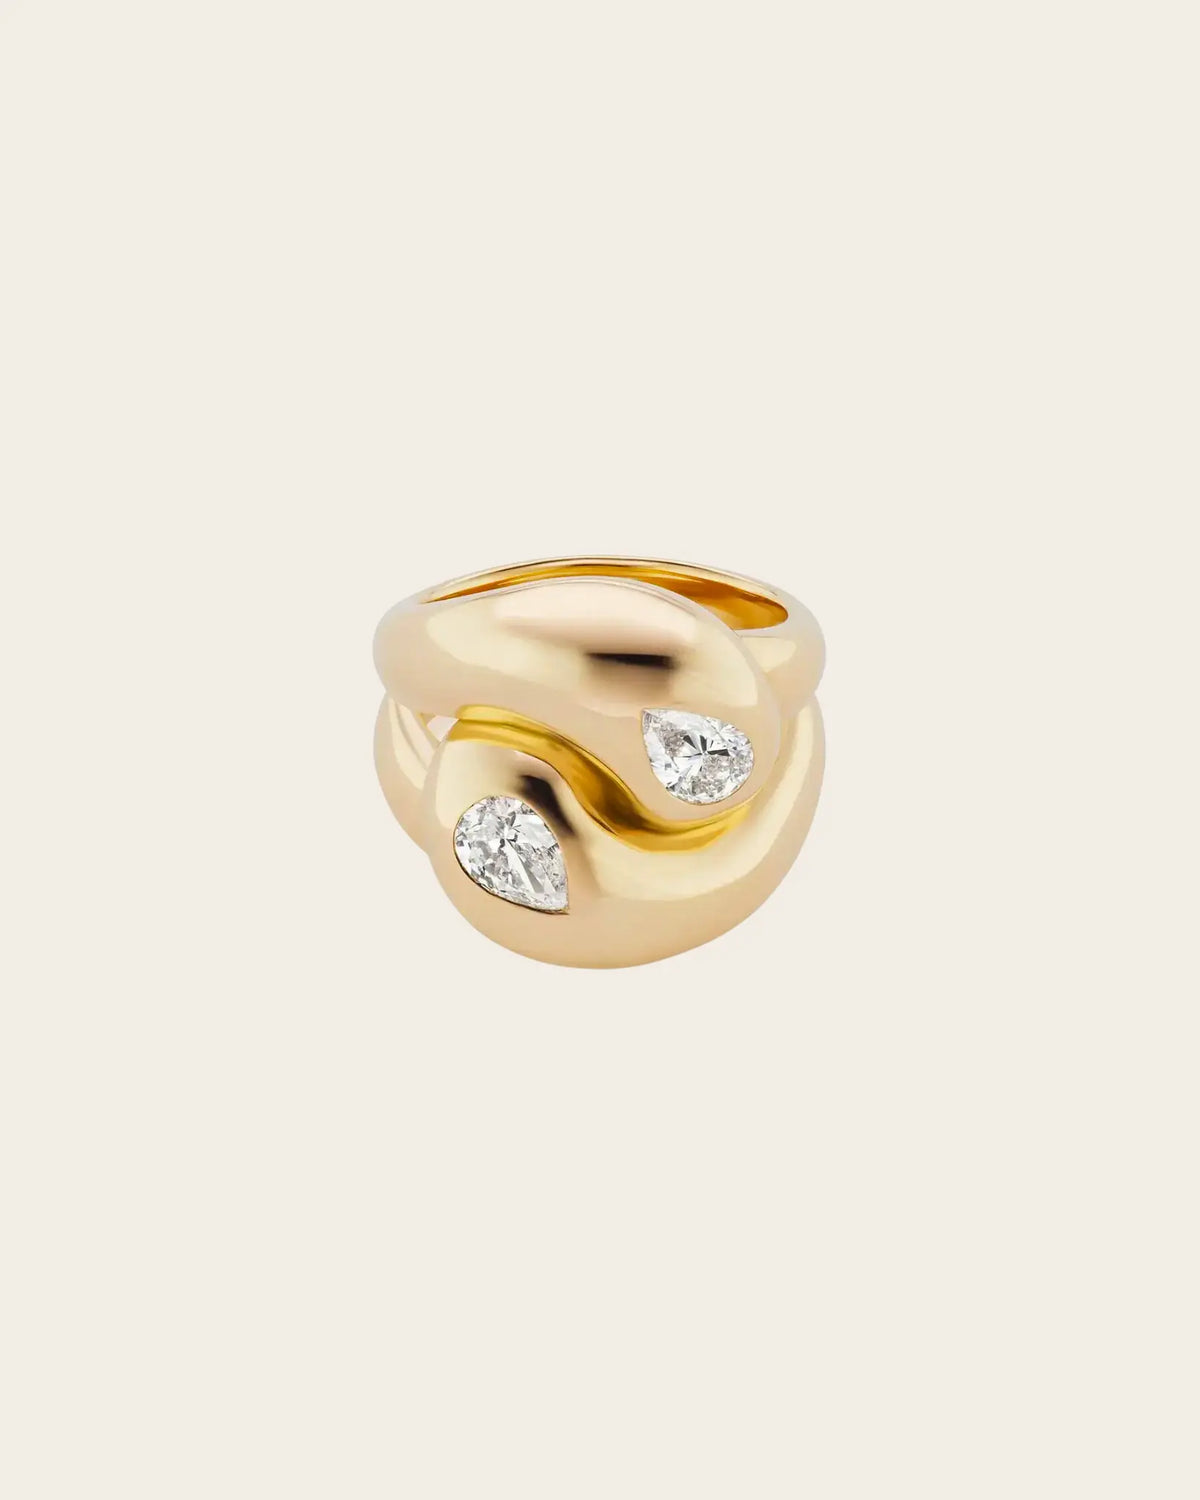 Brent Neale Knot Ring with Pear Shape Diamond Brent Neale Knot Ring with Pear Shape Diamond Brent Neale Brent Neale  Squash Blossom Vail